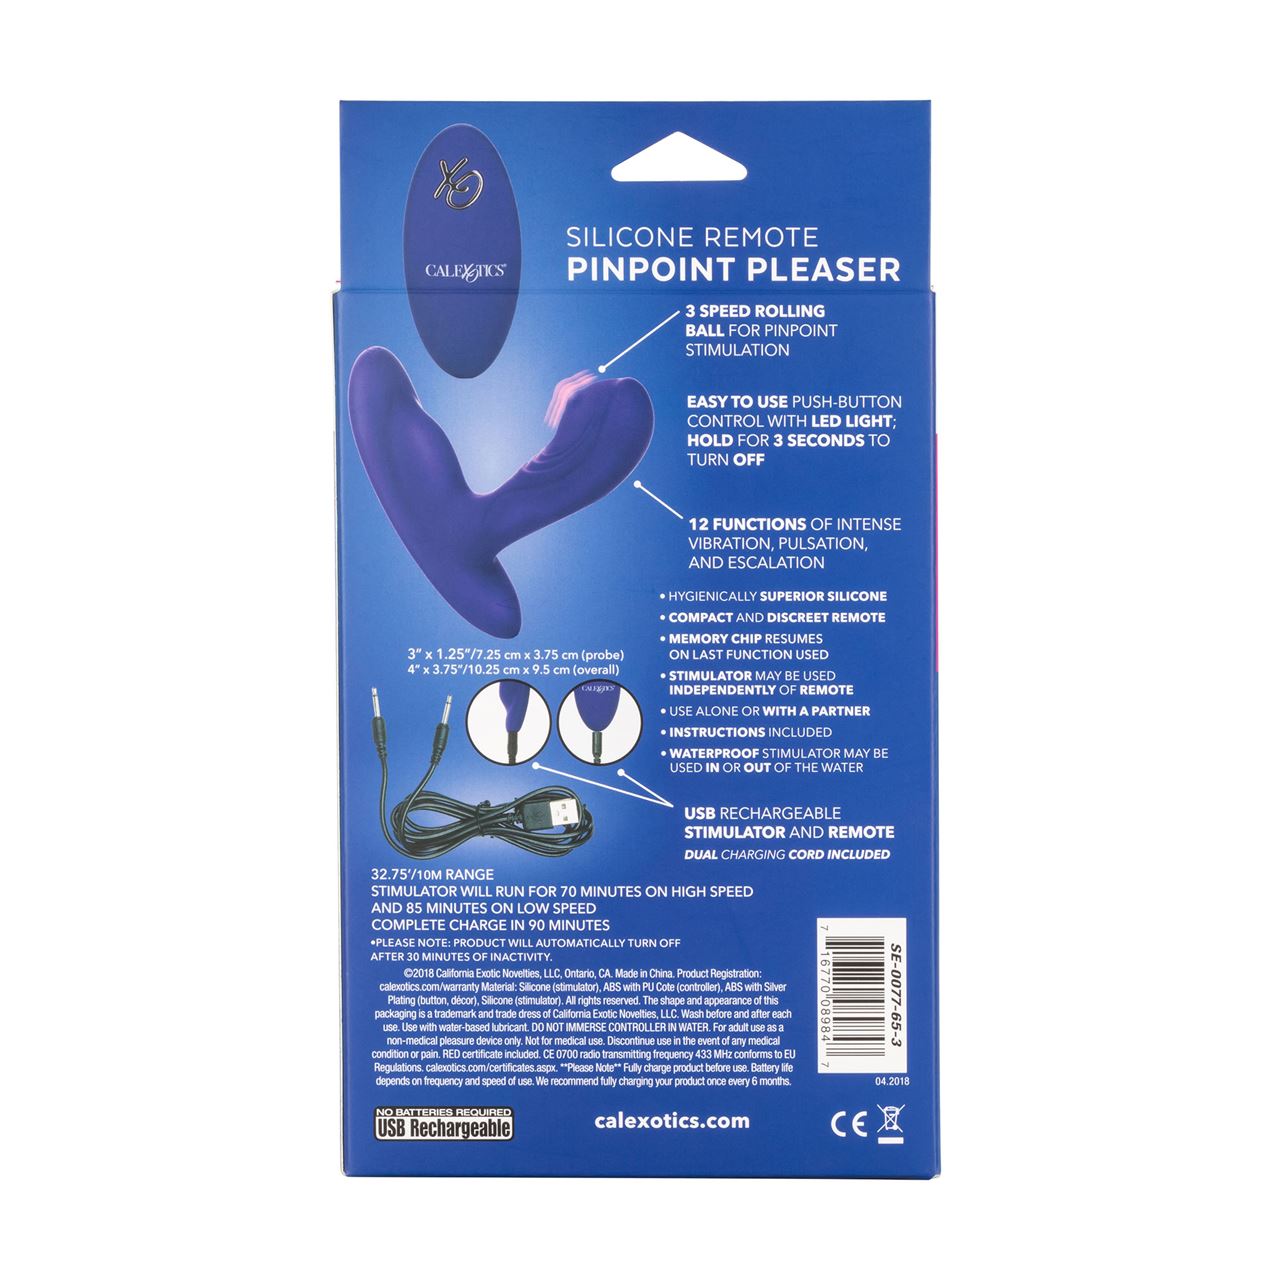 Silicone Remote Pinpoint Pleaser - UABDSM